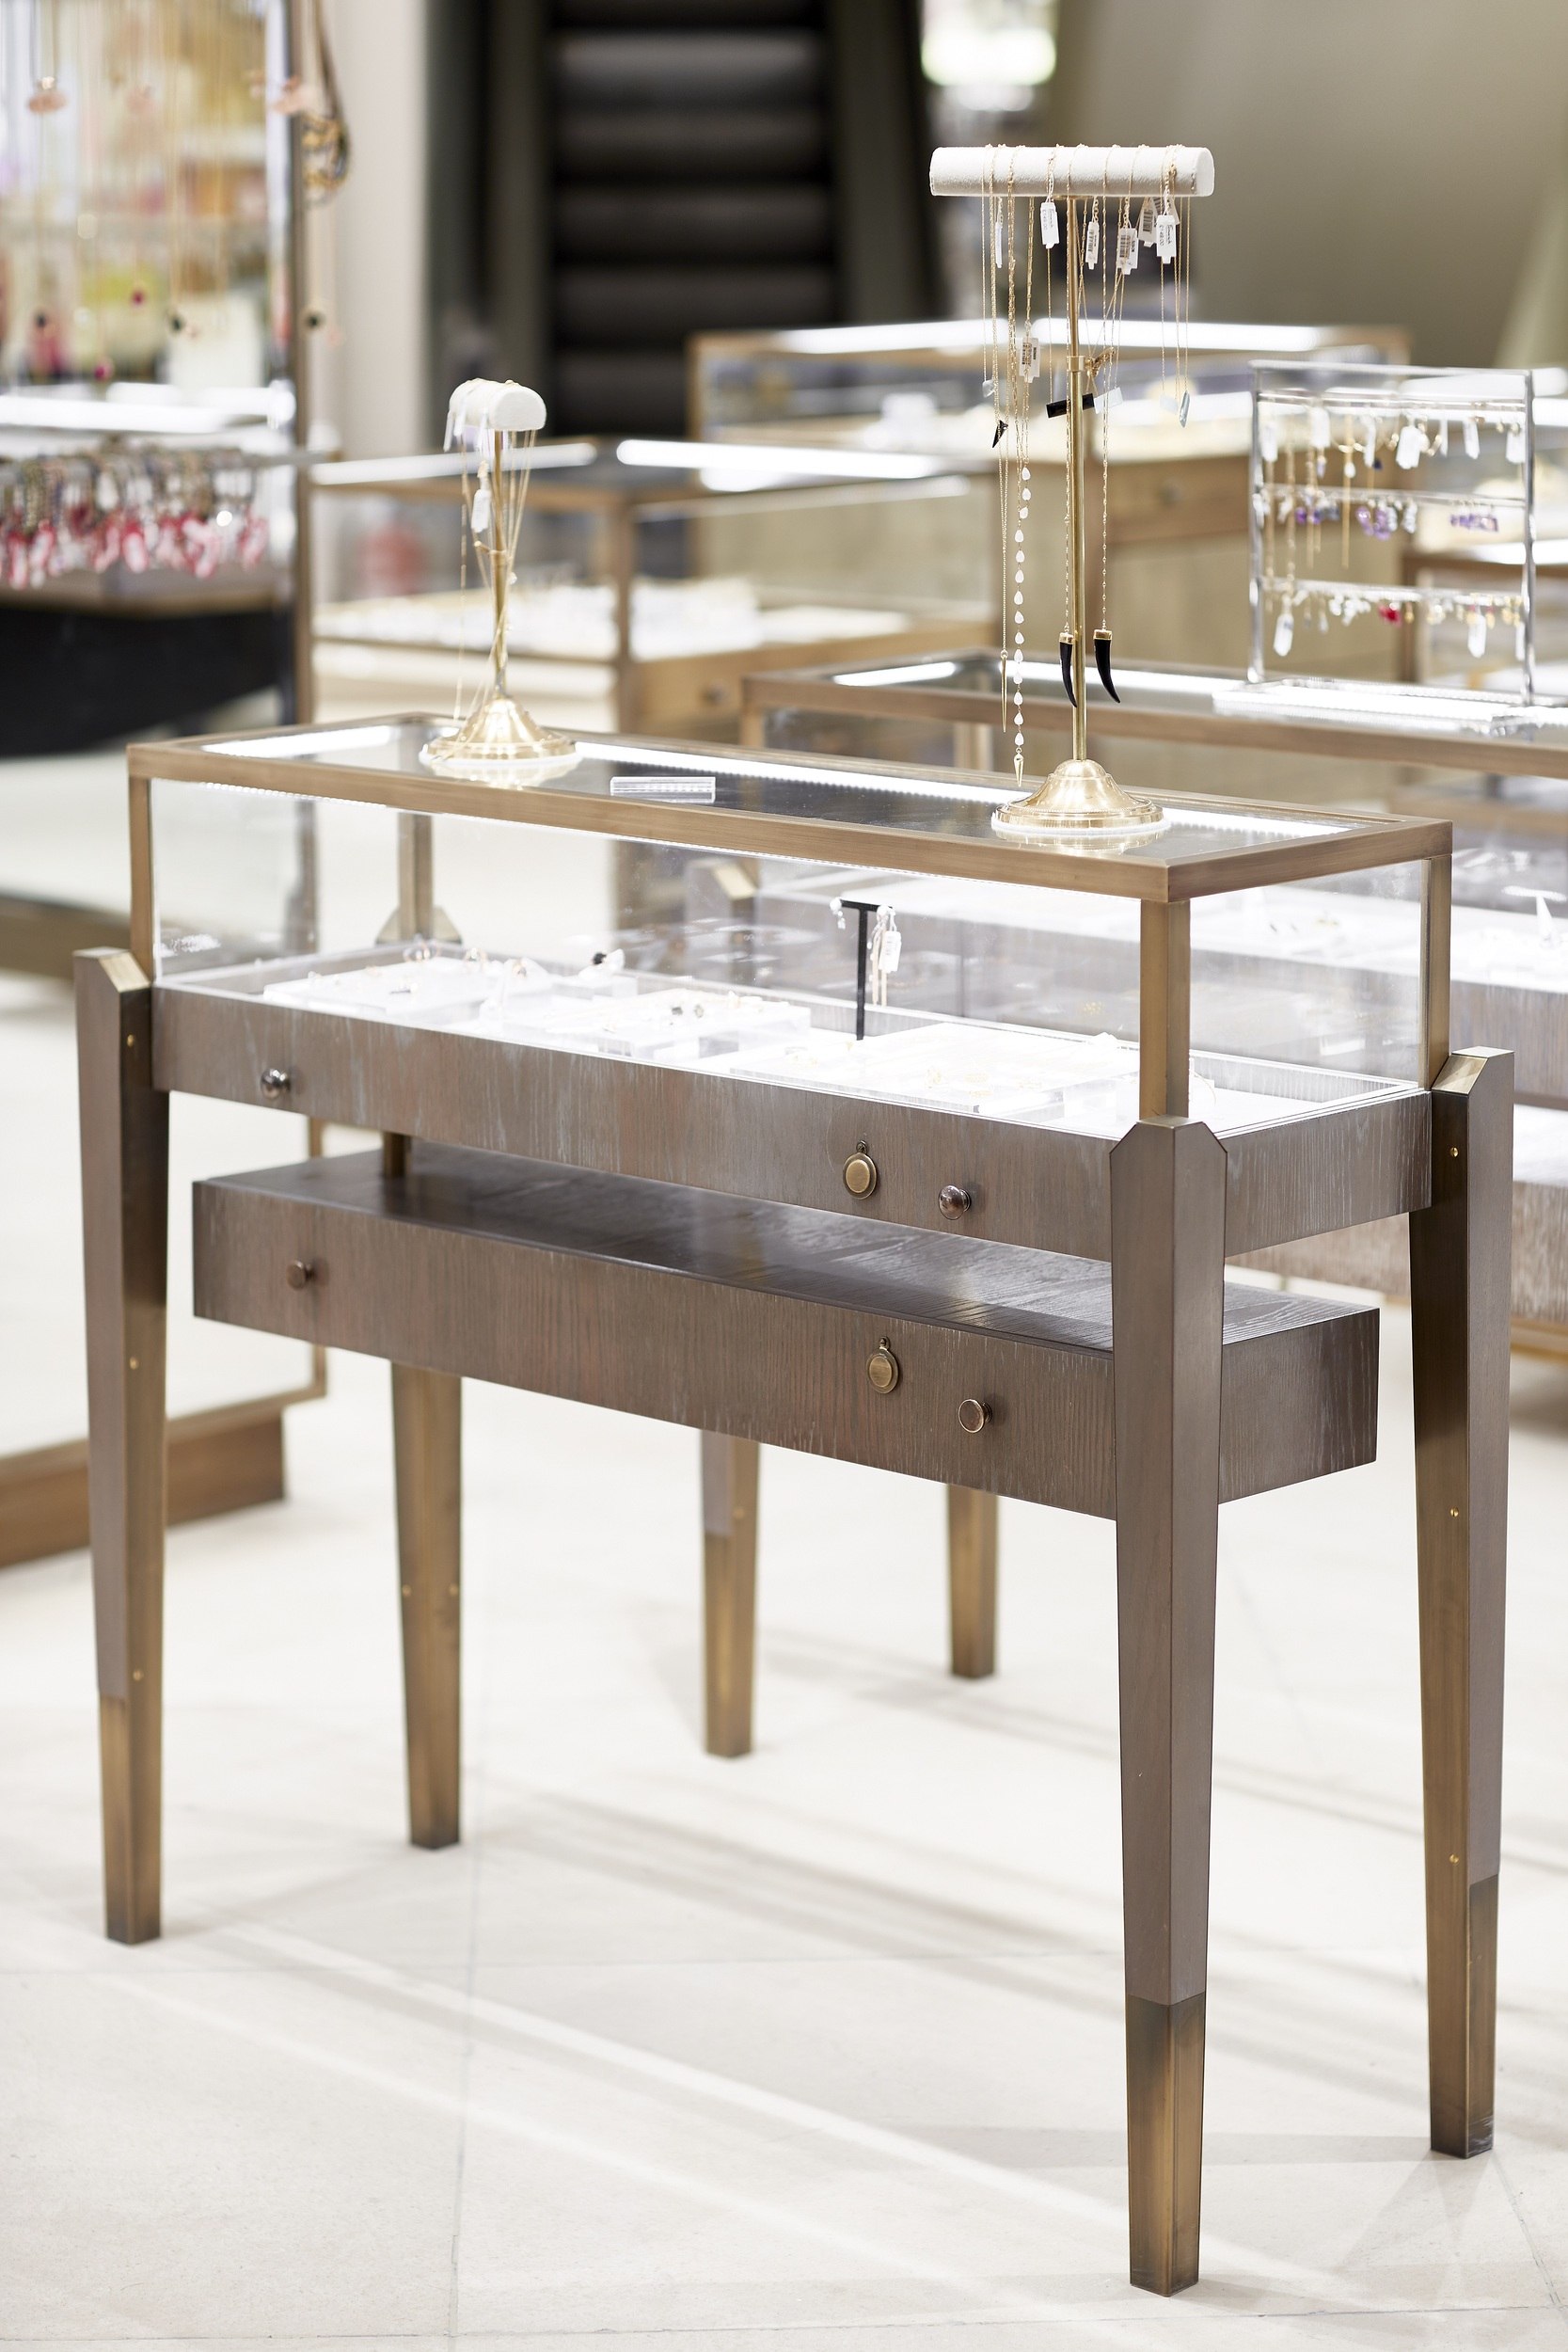 Elegant timber table display case with brass detail